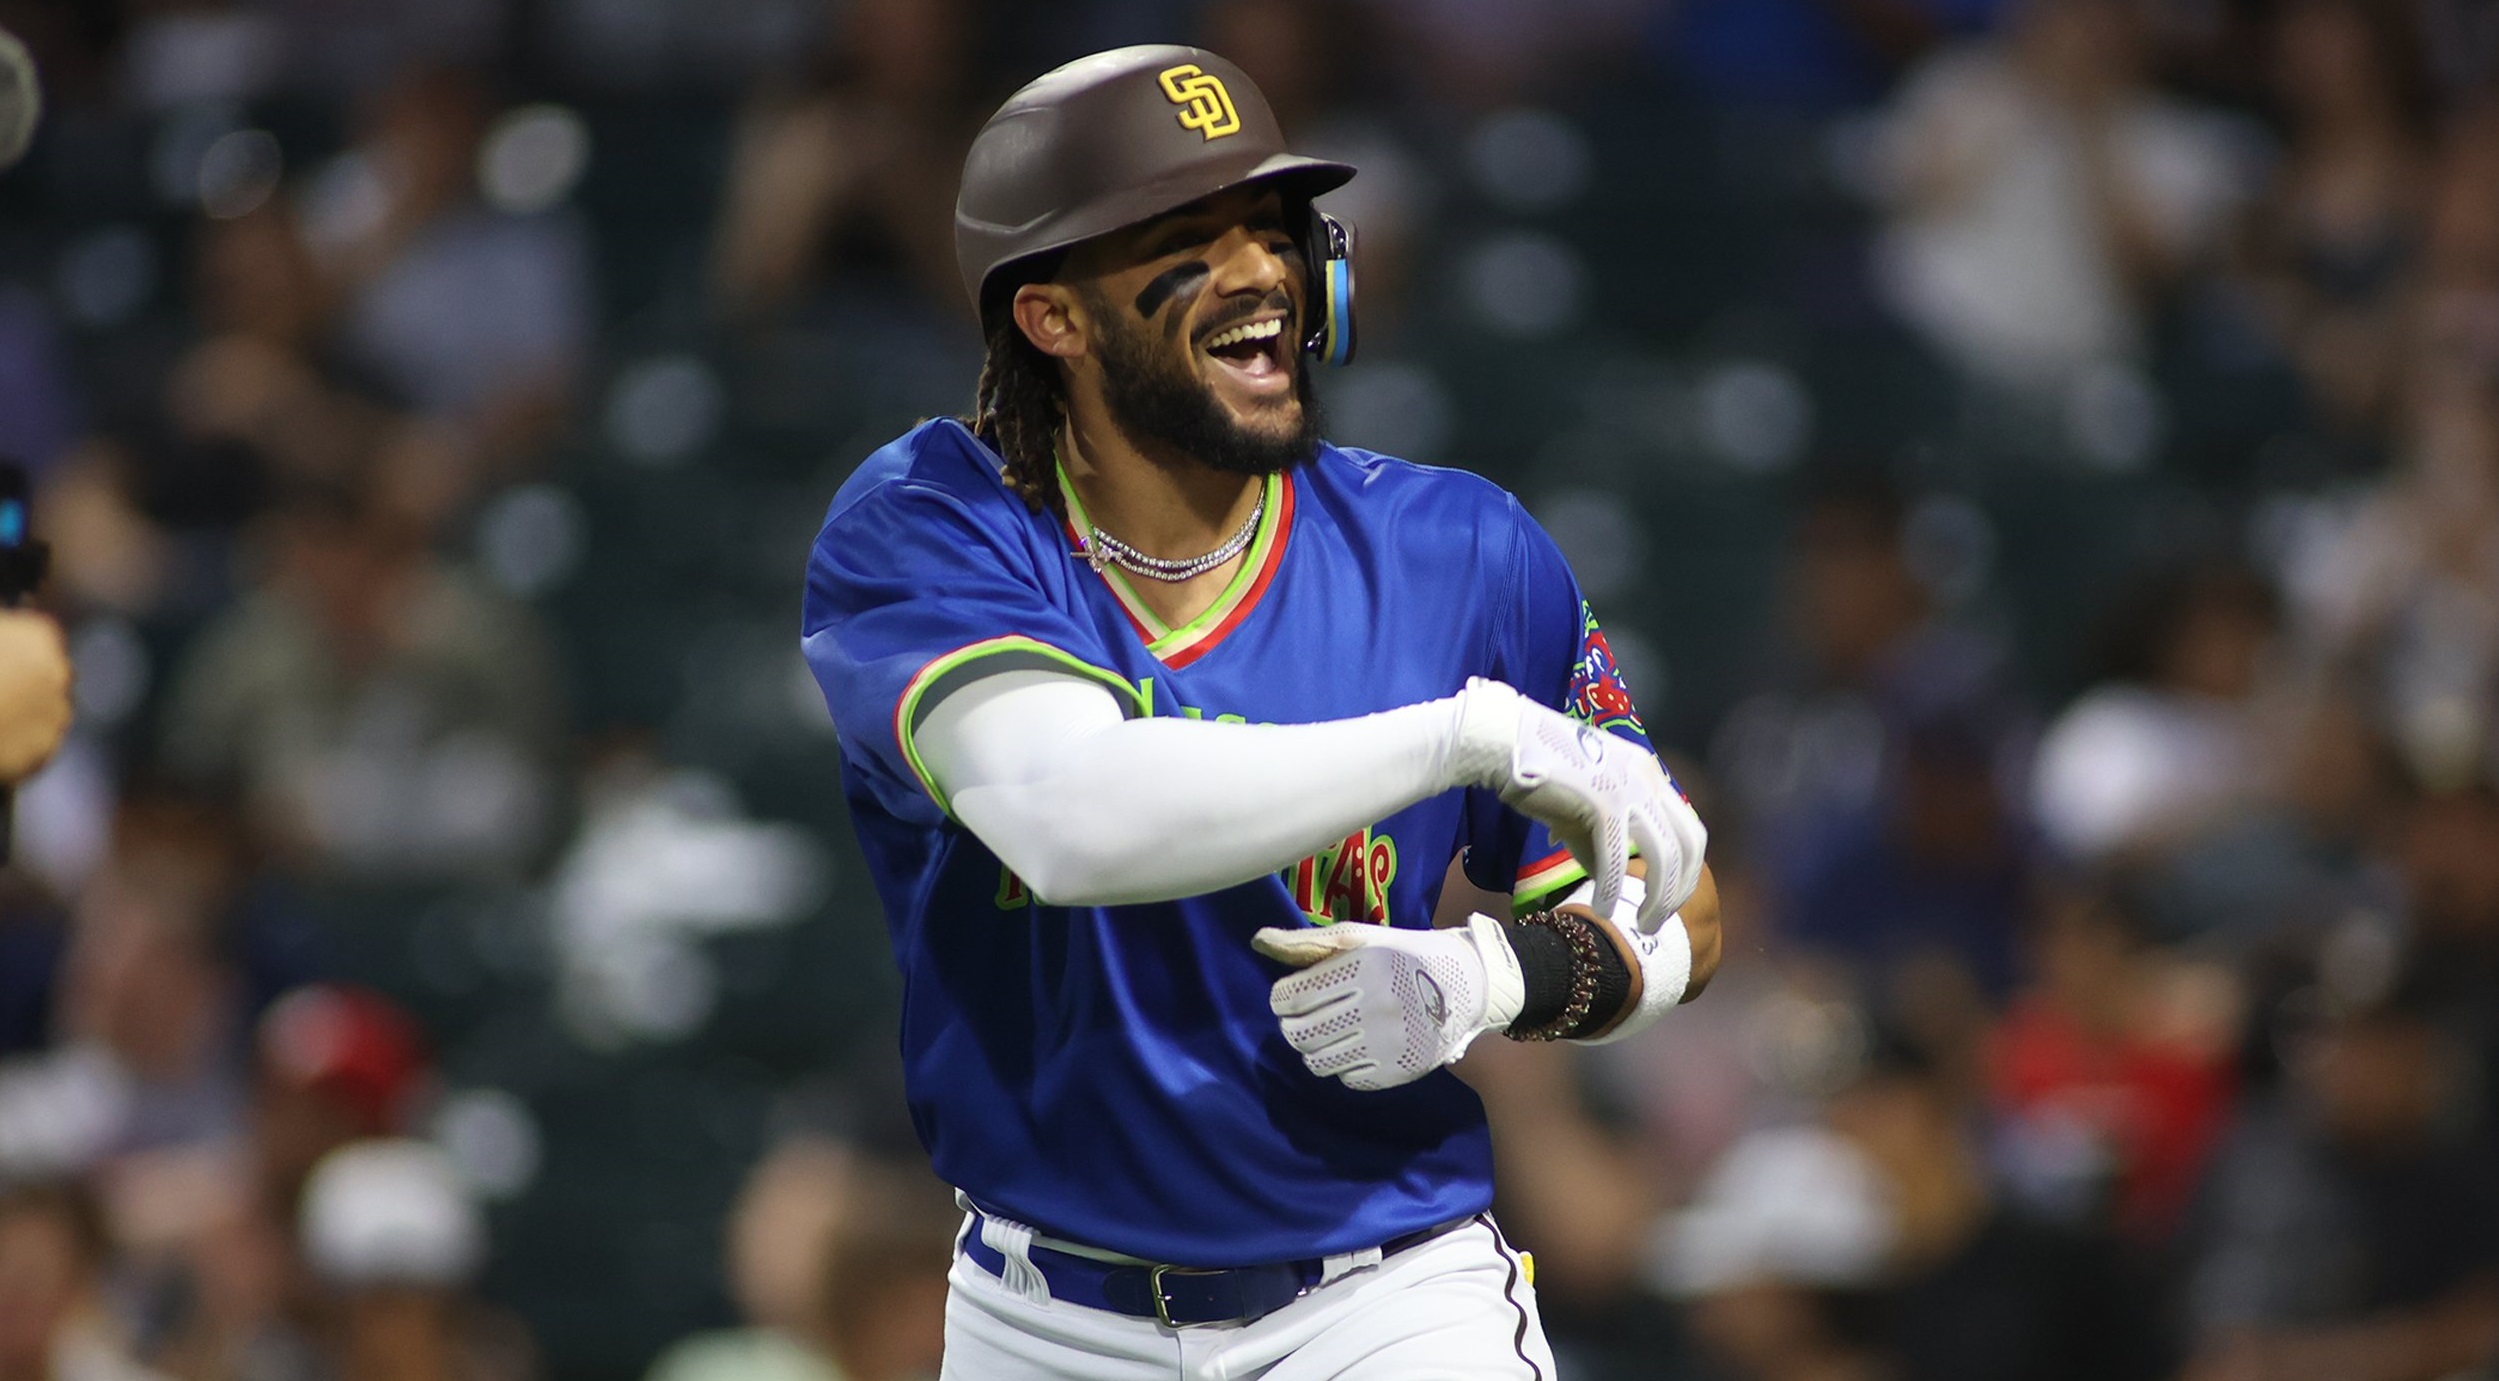 PADRES ON DECK: Tatis Has 3 HRs, 8 RBI at AAA-El Paso … Where